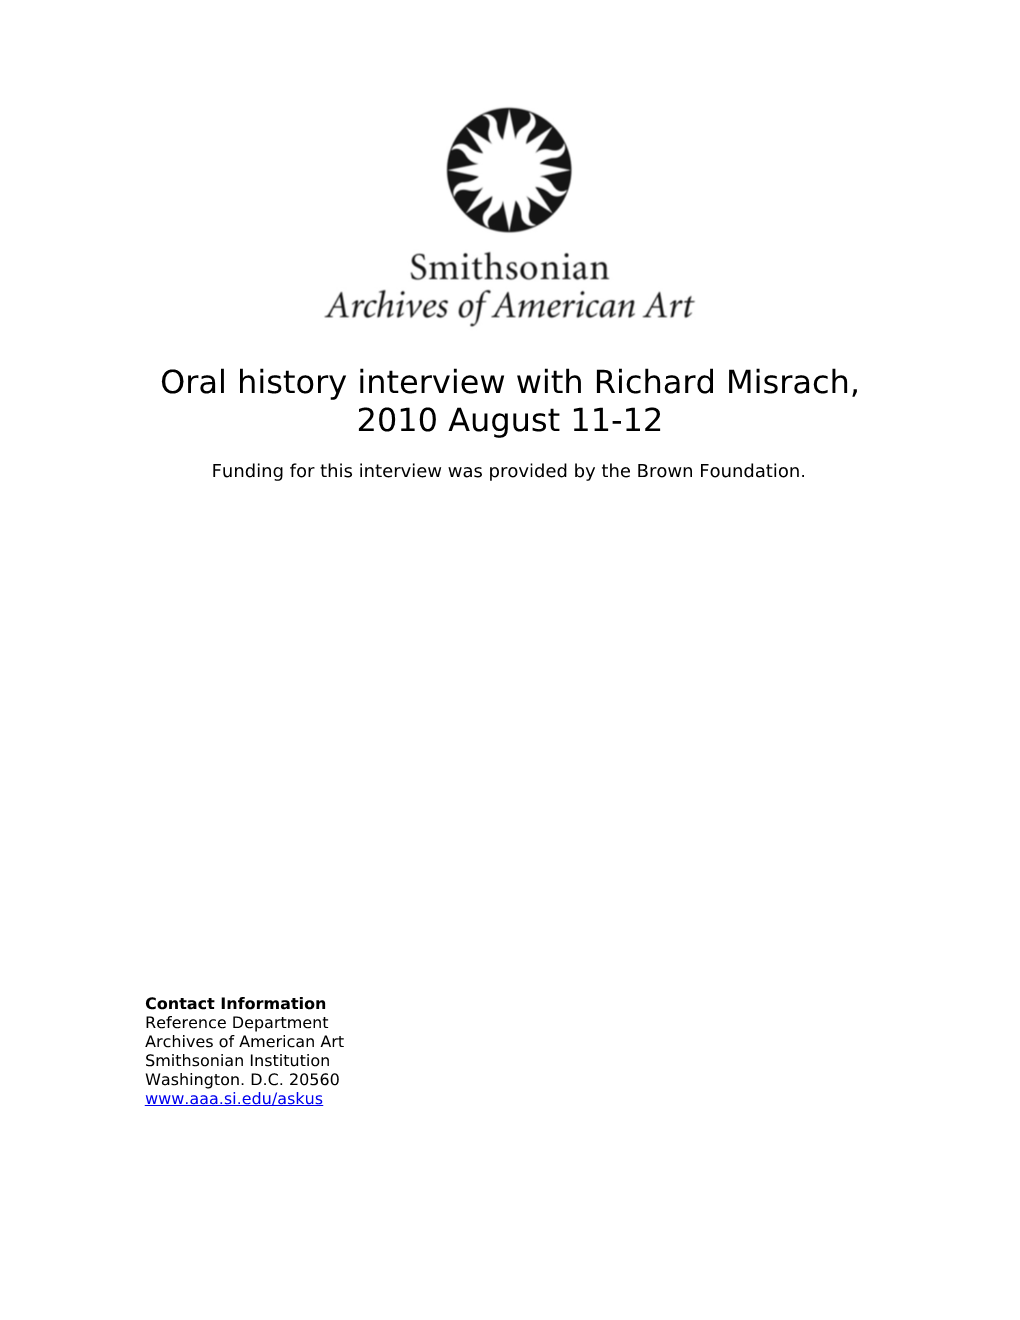 Oral History Interview with Richard Misrach, 2010 August 11-12